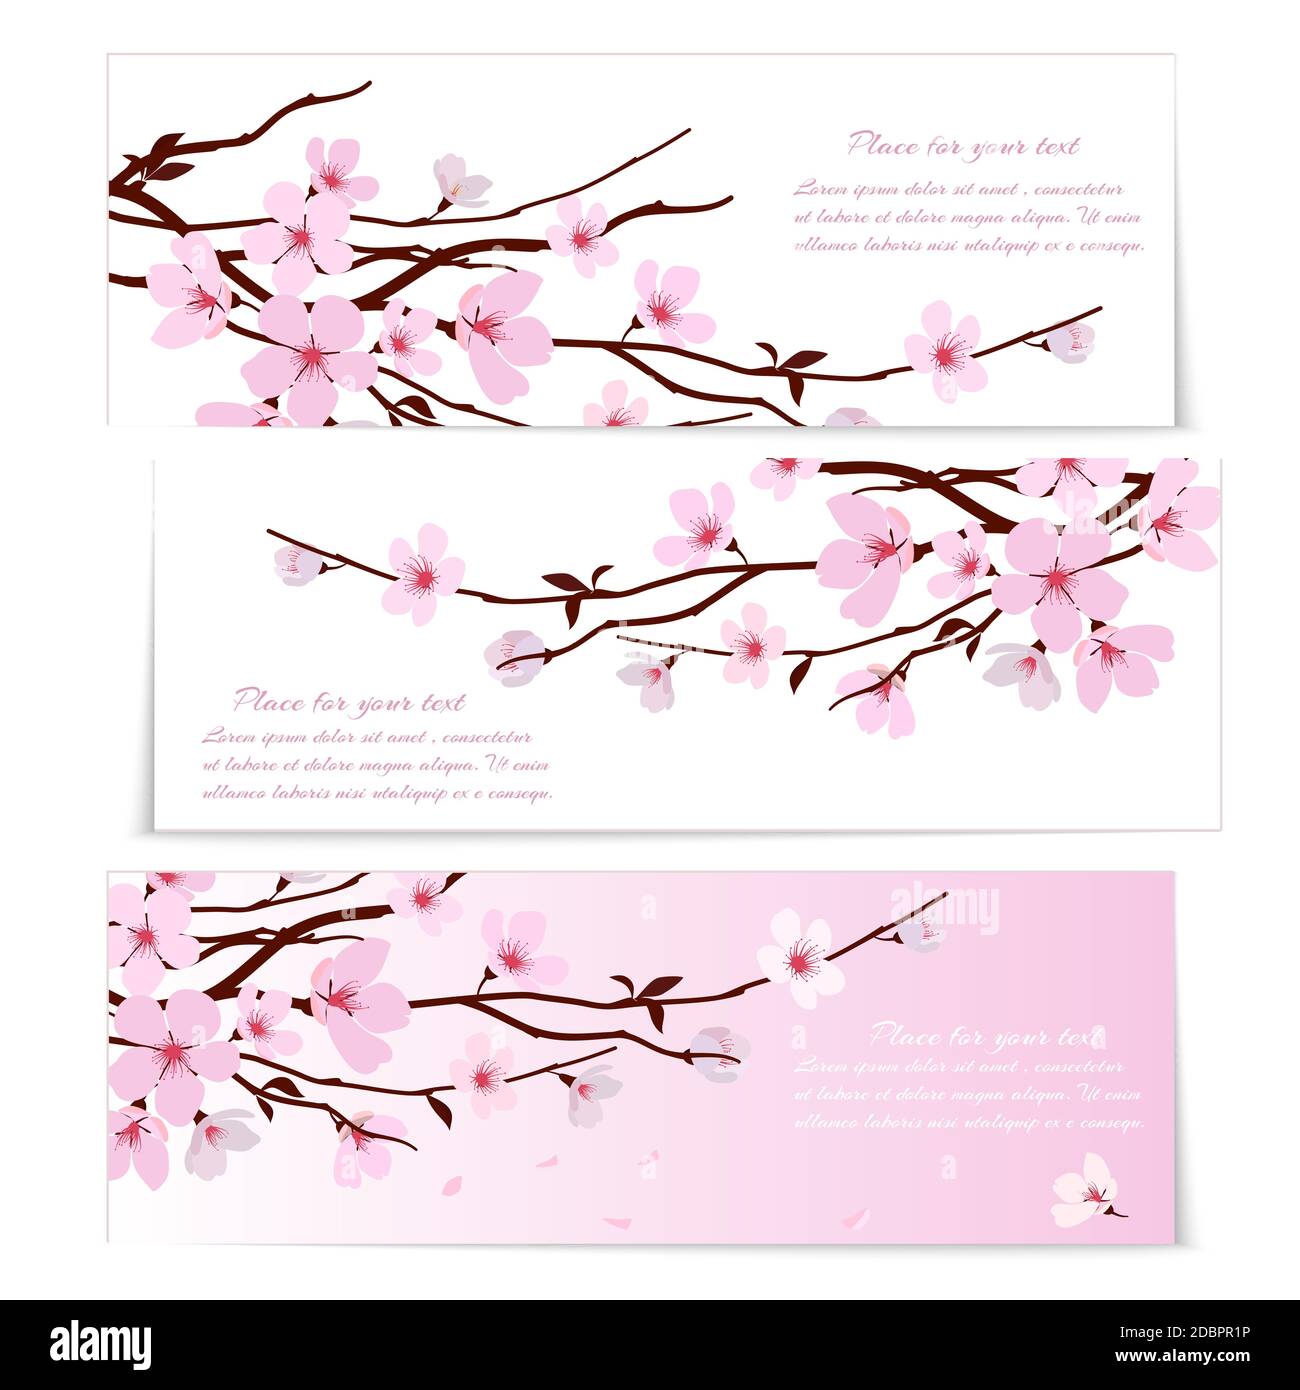 Three banners with fresh pink ornamental Sakura flowers  or cherry blossom  symbolic of spring on long twigs on white and pink backgrounds with copysp Stock Vector